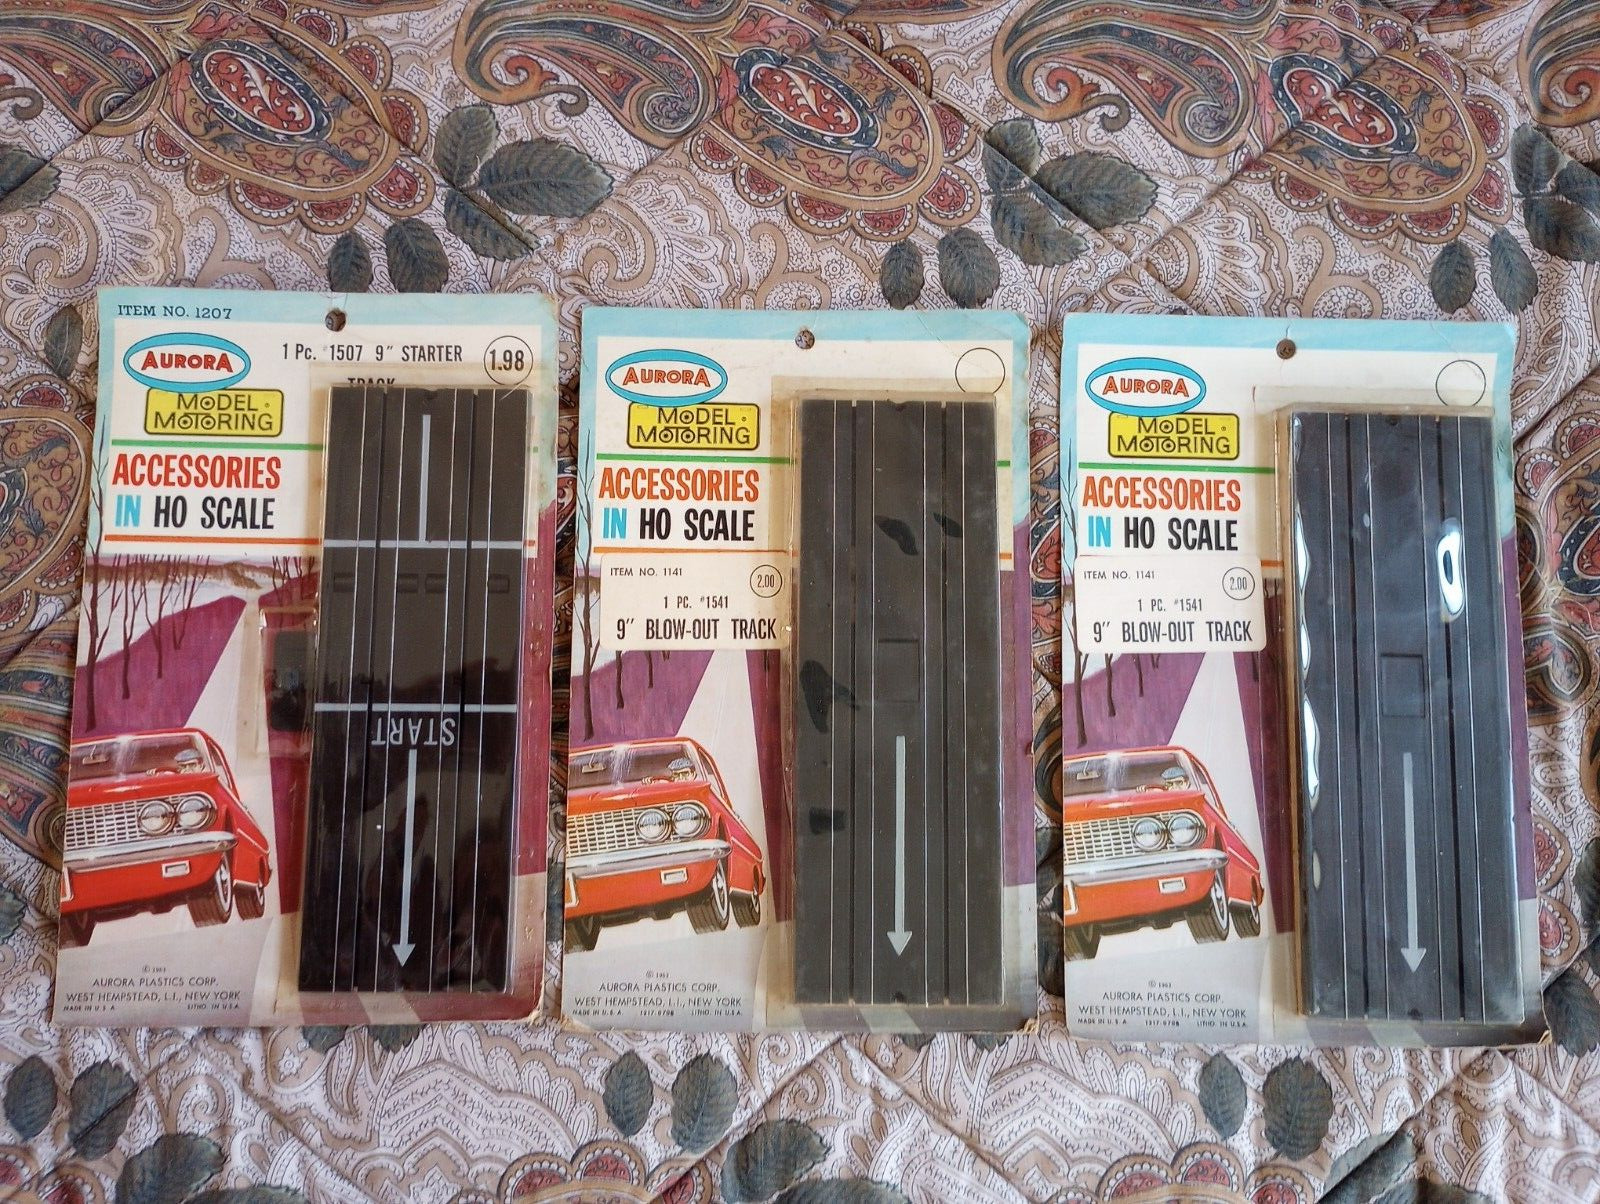 NOS STILL SEALED 3 PKGS OF 9" STRAIGHT ACCESORIES TRACK FOR AURORA SLOT CARS